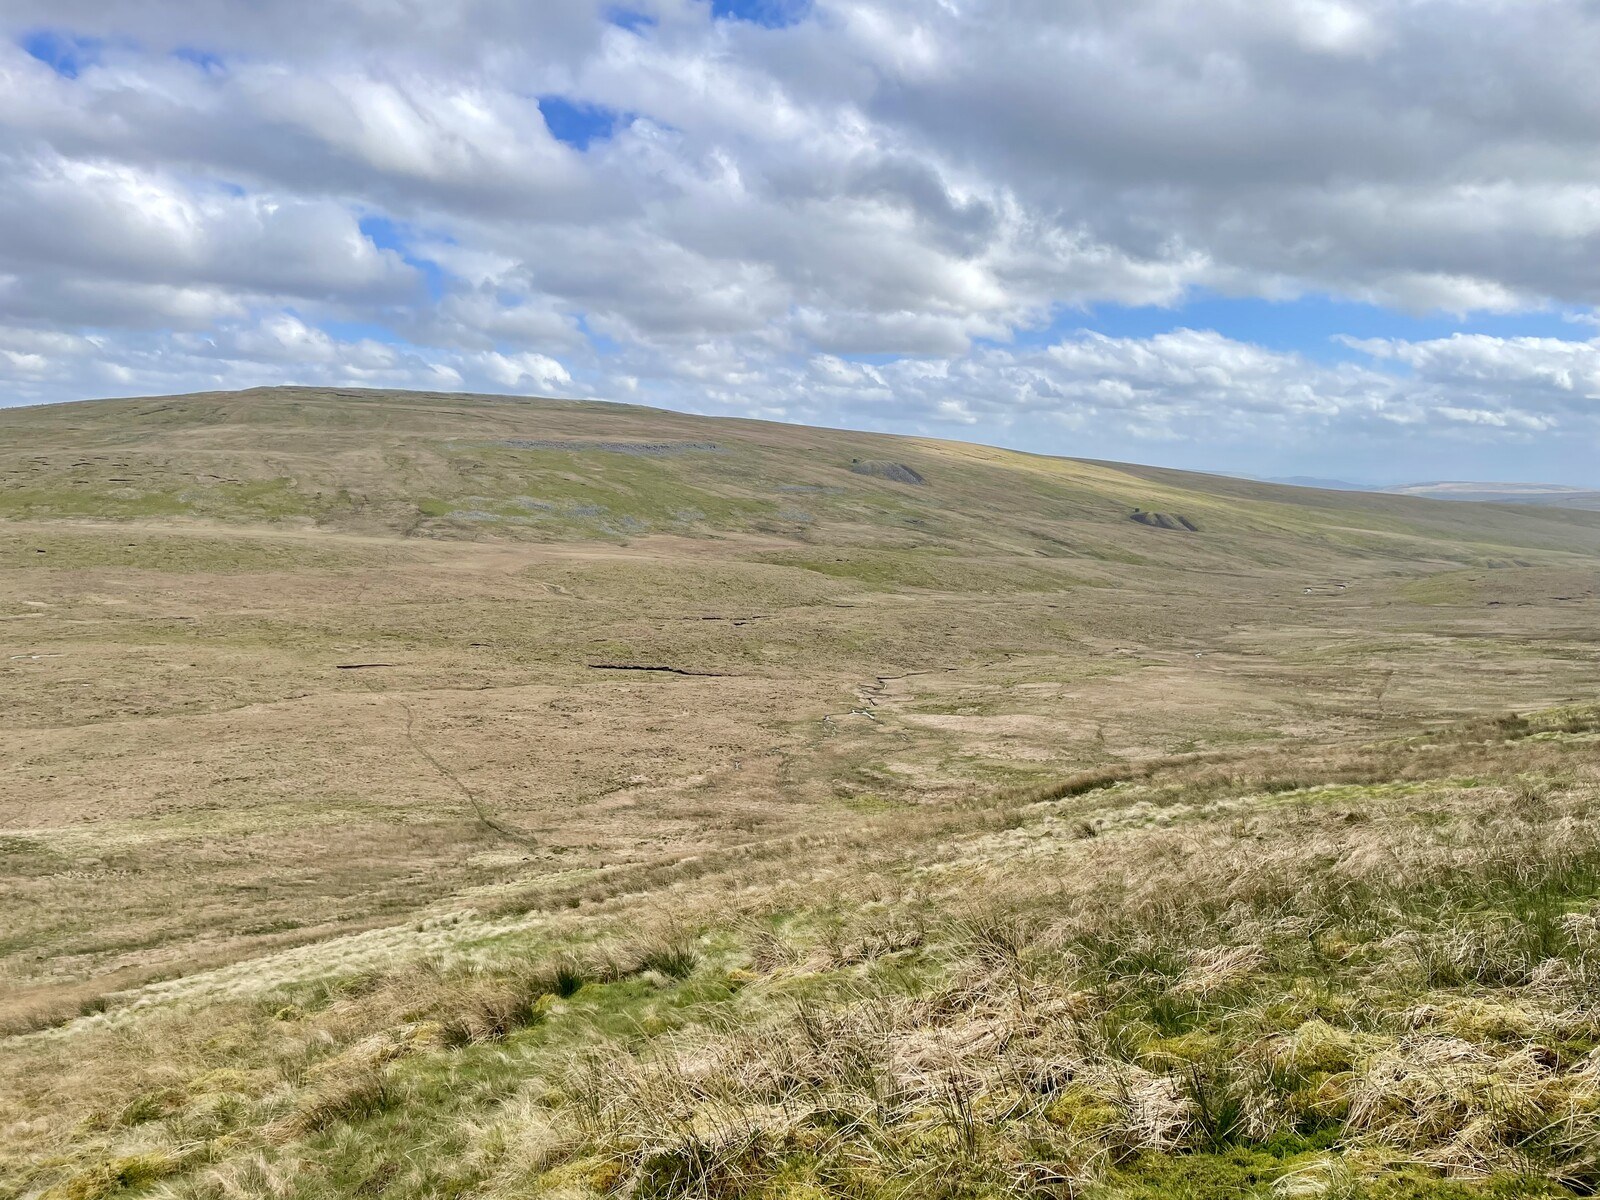 A view of the empty moor between the north side of Whernside and the bleak Blea Moor